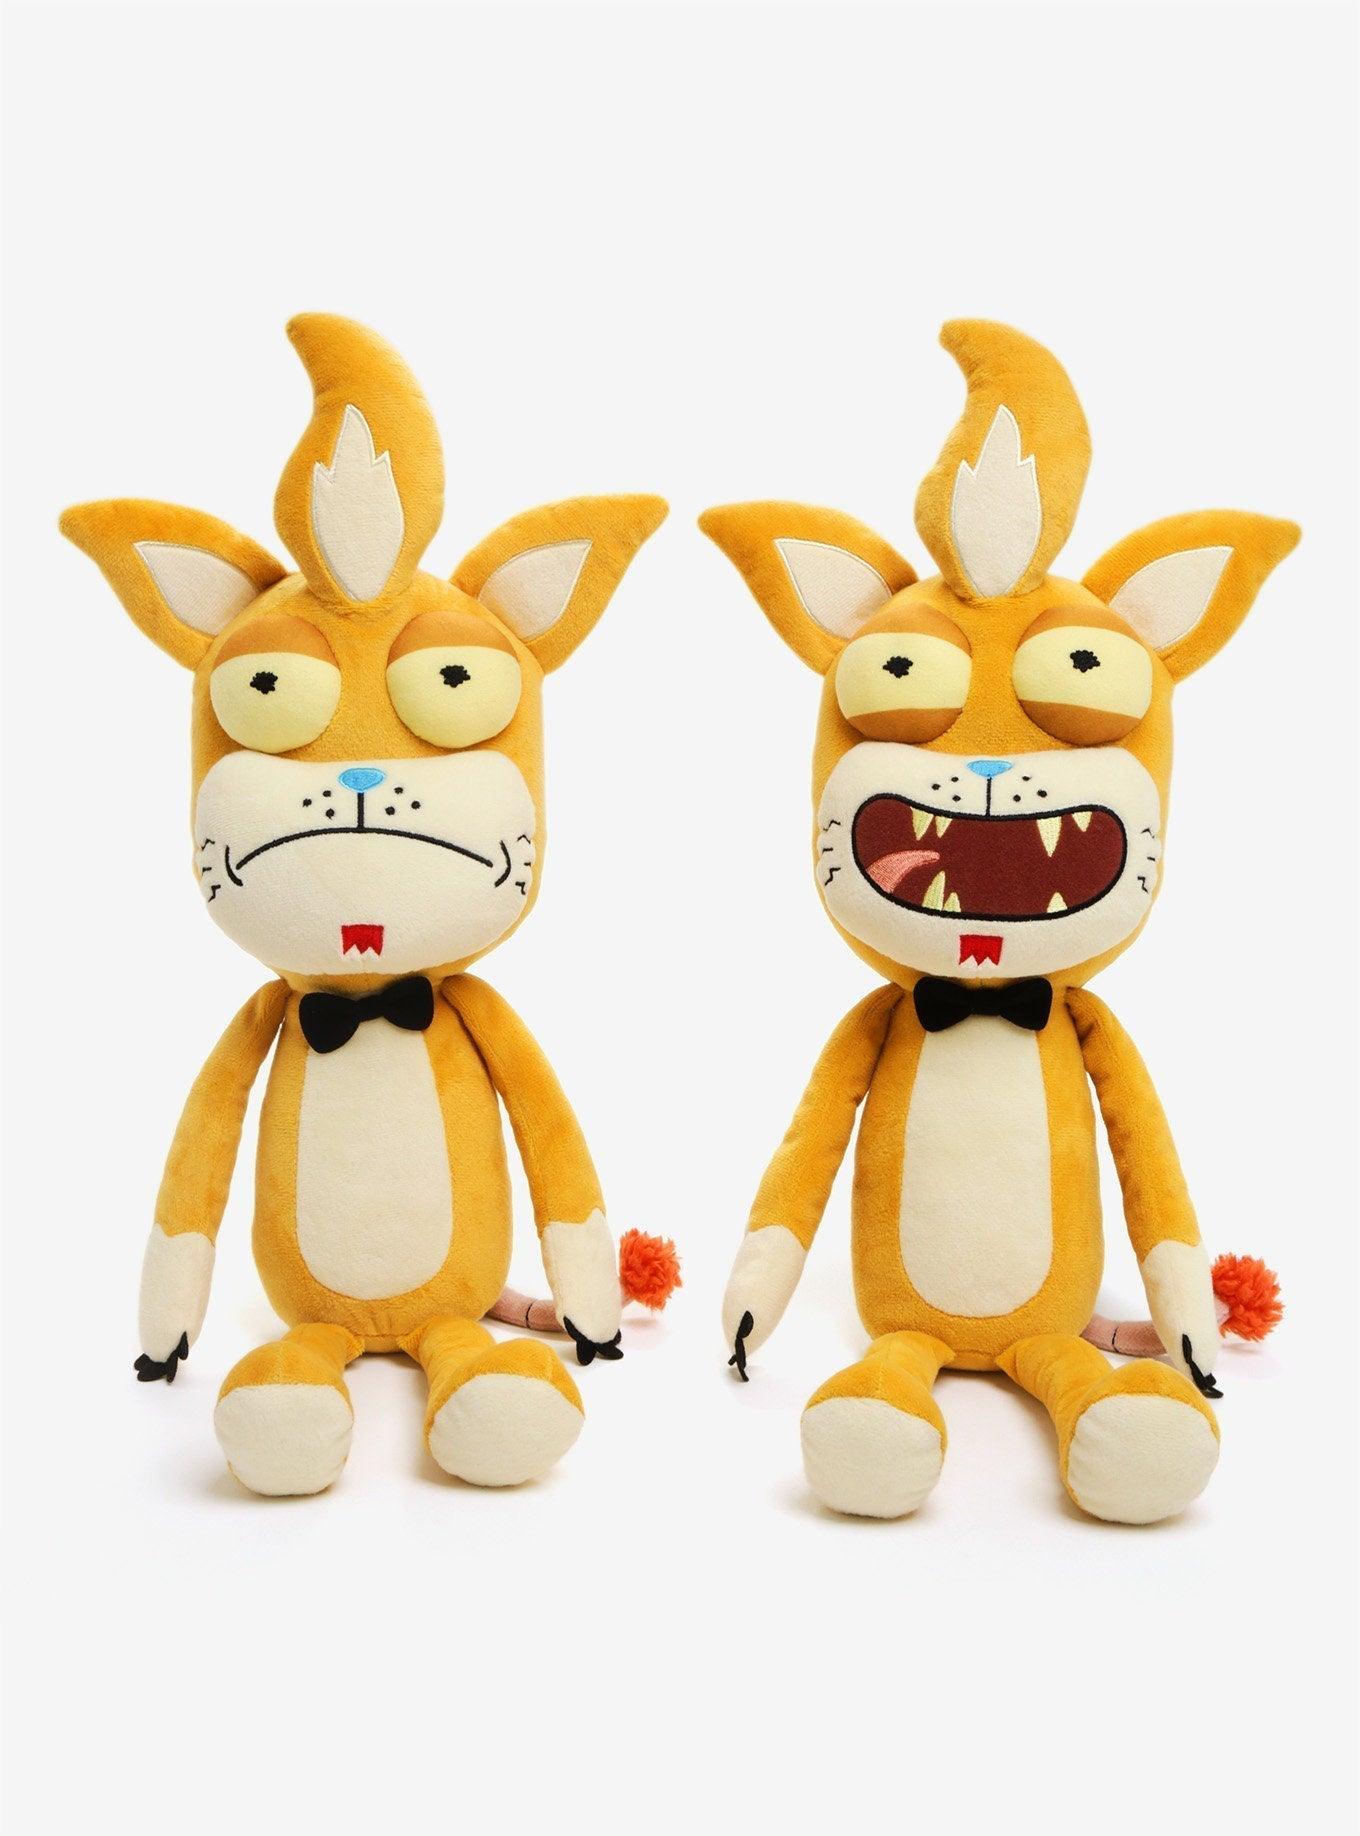 FUN23577 Rick and Morty - Squanchy (with chase) 12" US Exclusive Plush - Funko - Titan Pop Culture